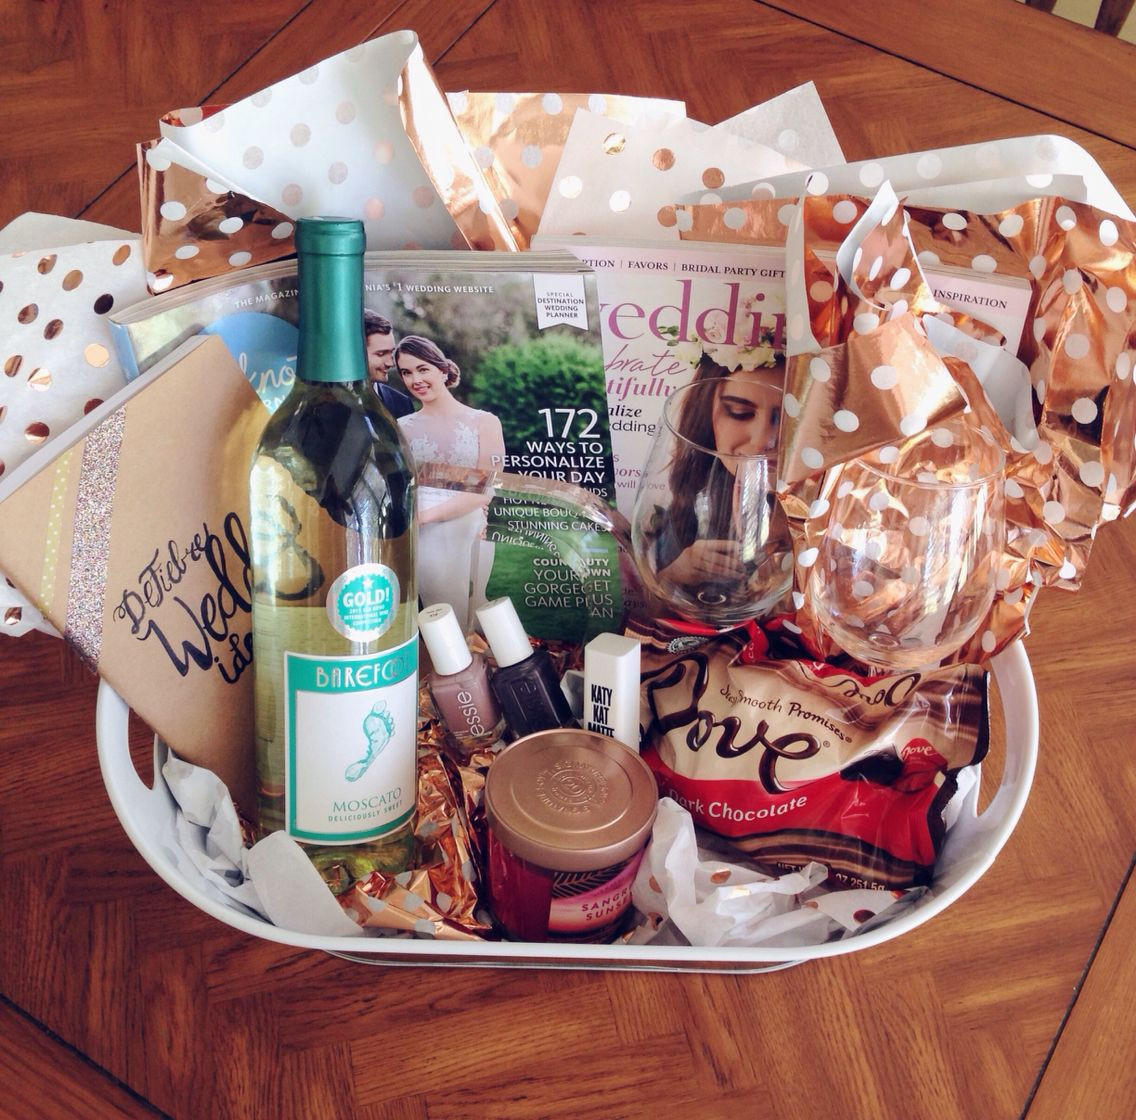 Best Engagement Party Gift Ideas
 Engagement Gift Basket Survival Kit Everything your